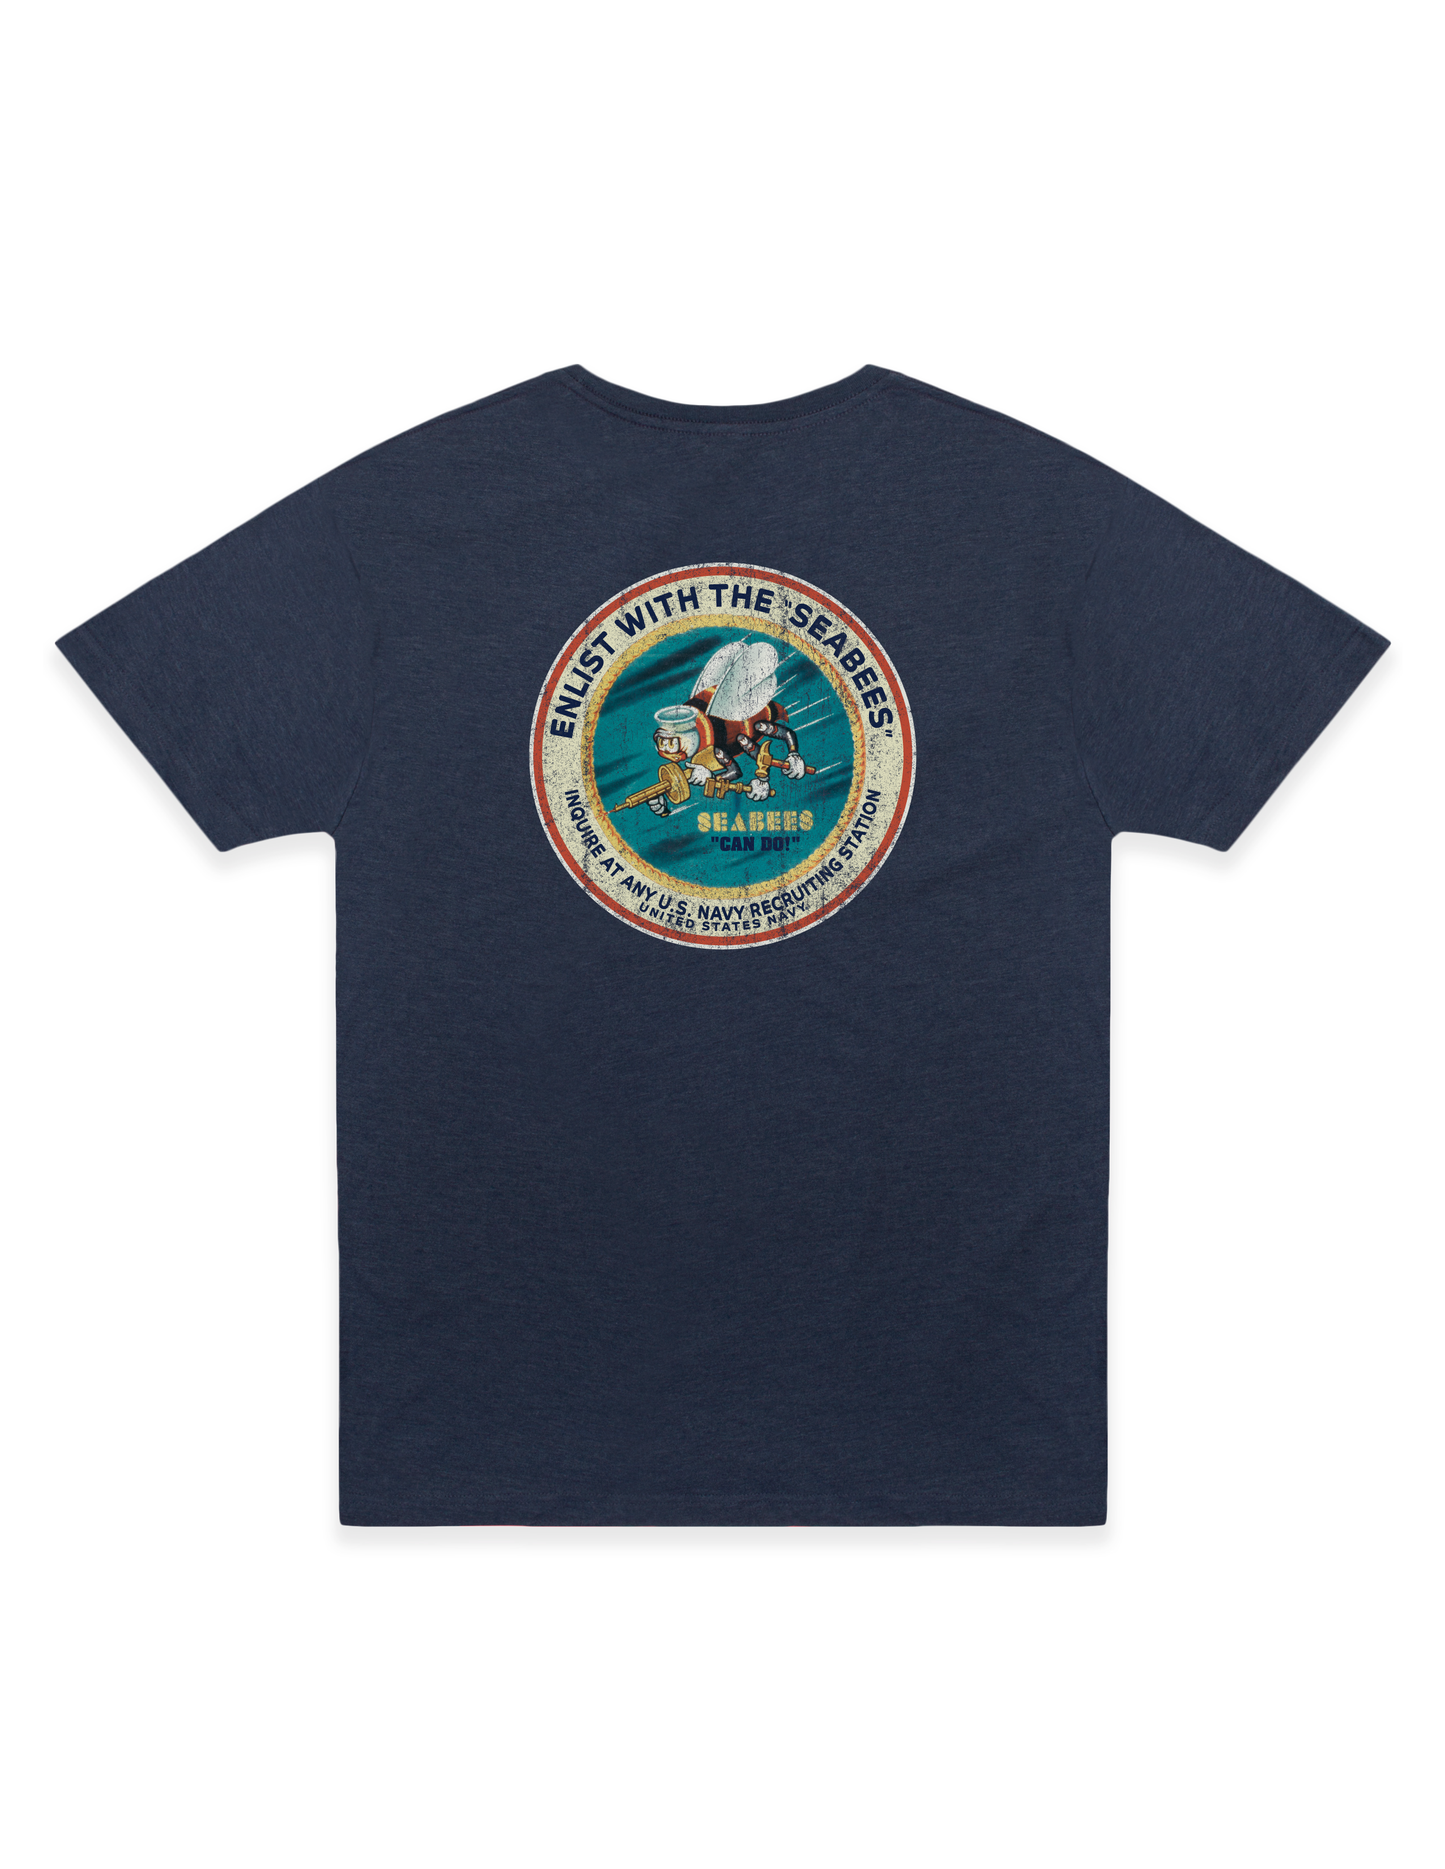 Enlist with the SEABEES! America's Navy | Vintage Heather Navy Tee